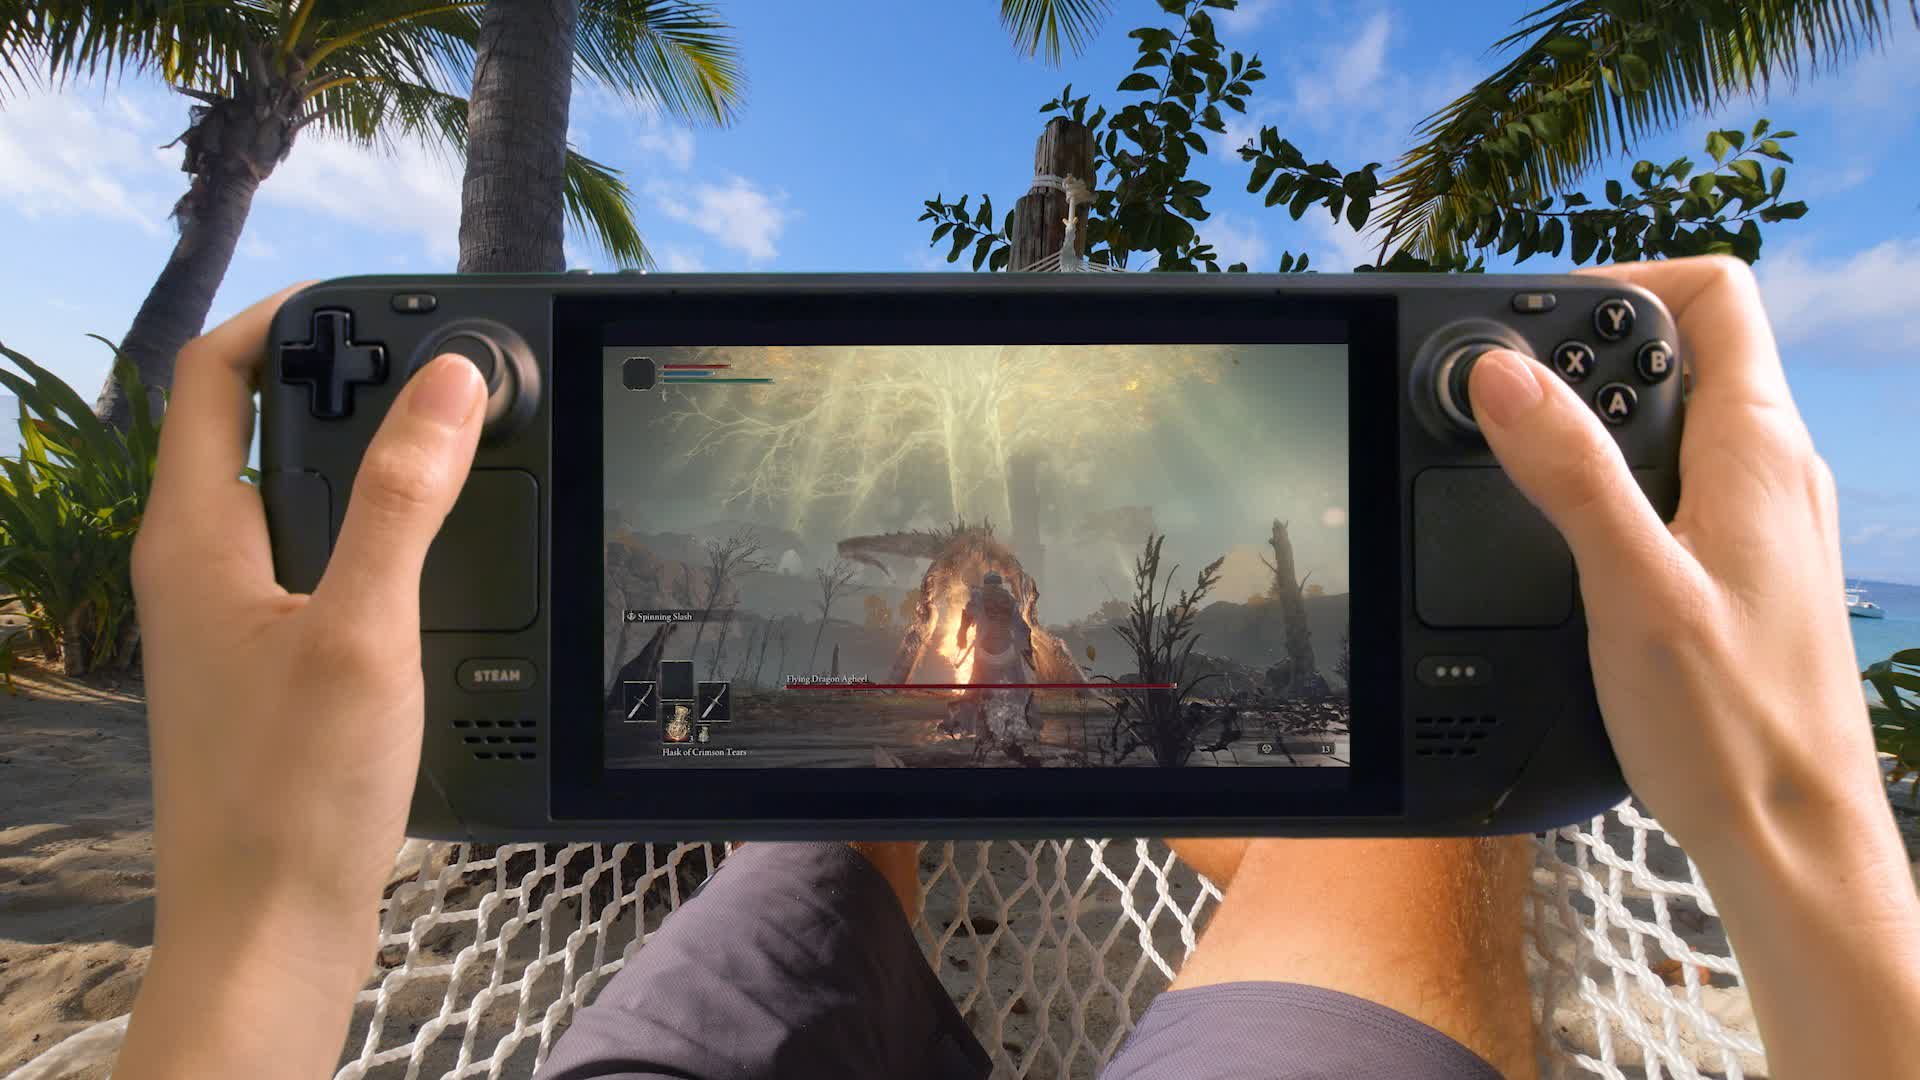 Don't use the Steam Deck or Nintendo Switch in excessive heat, warn the makers